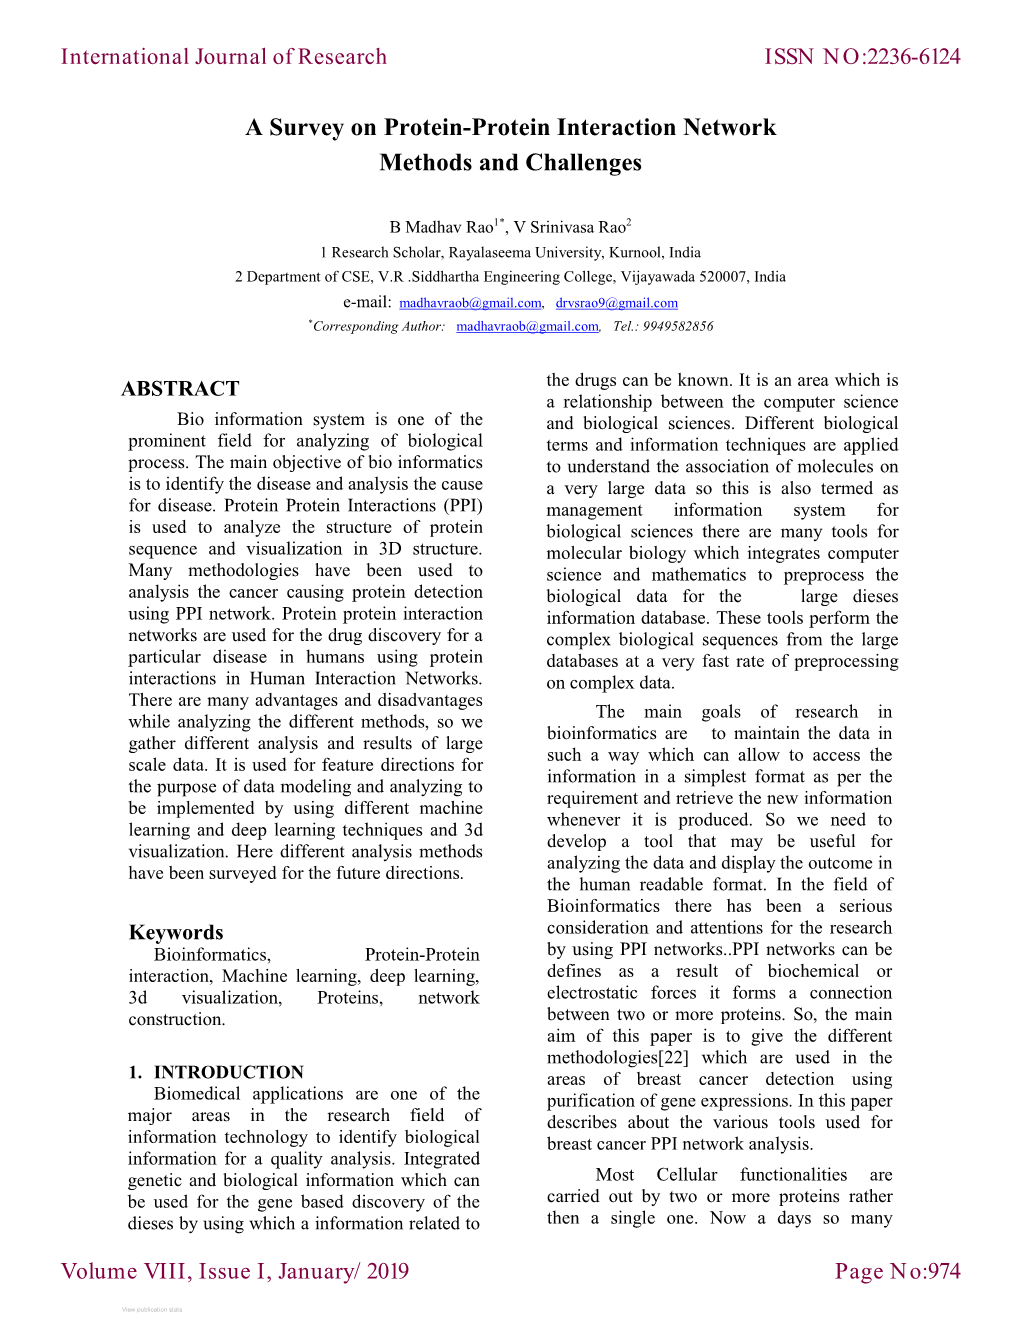 A Survey on Protein-Protein Interaction Network Methods and Challenges